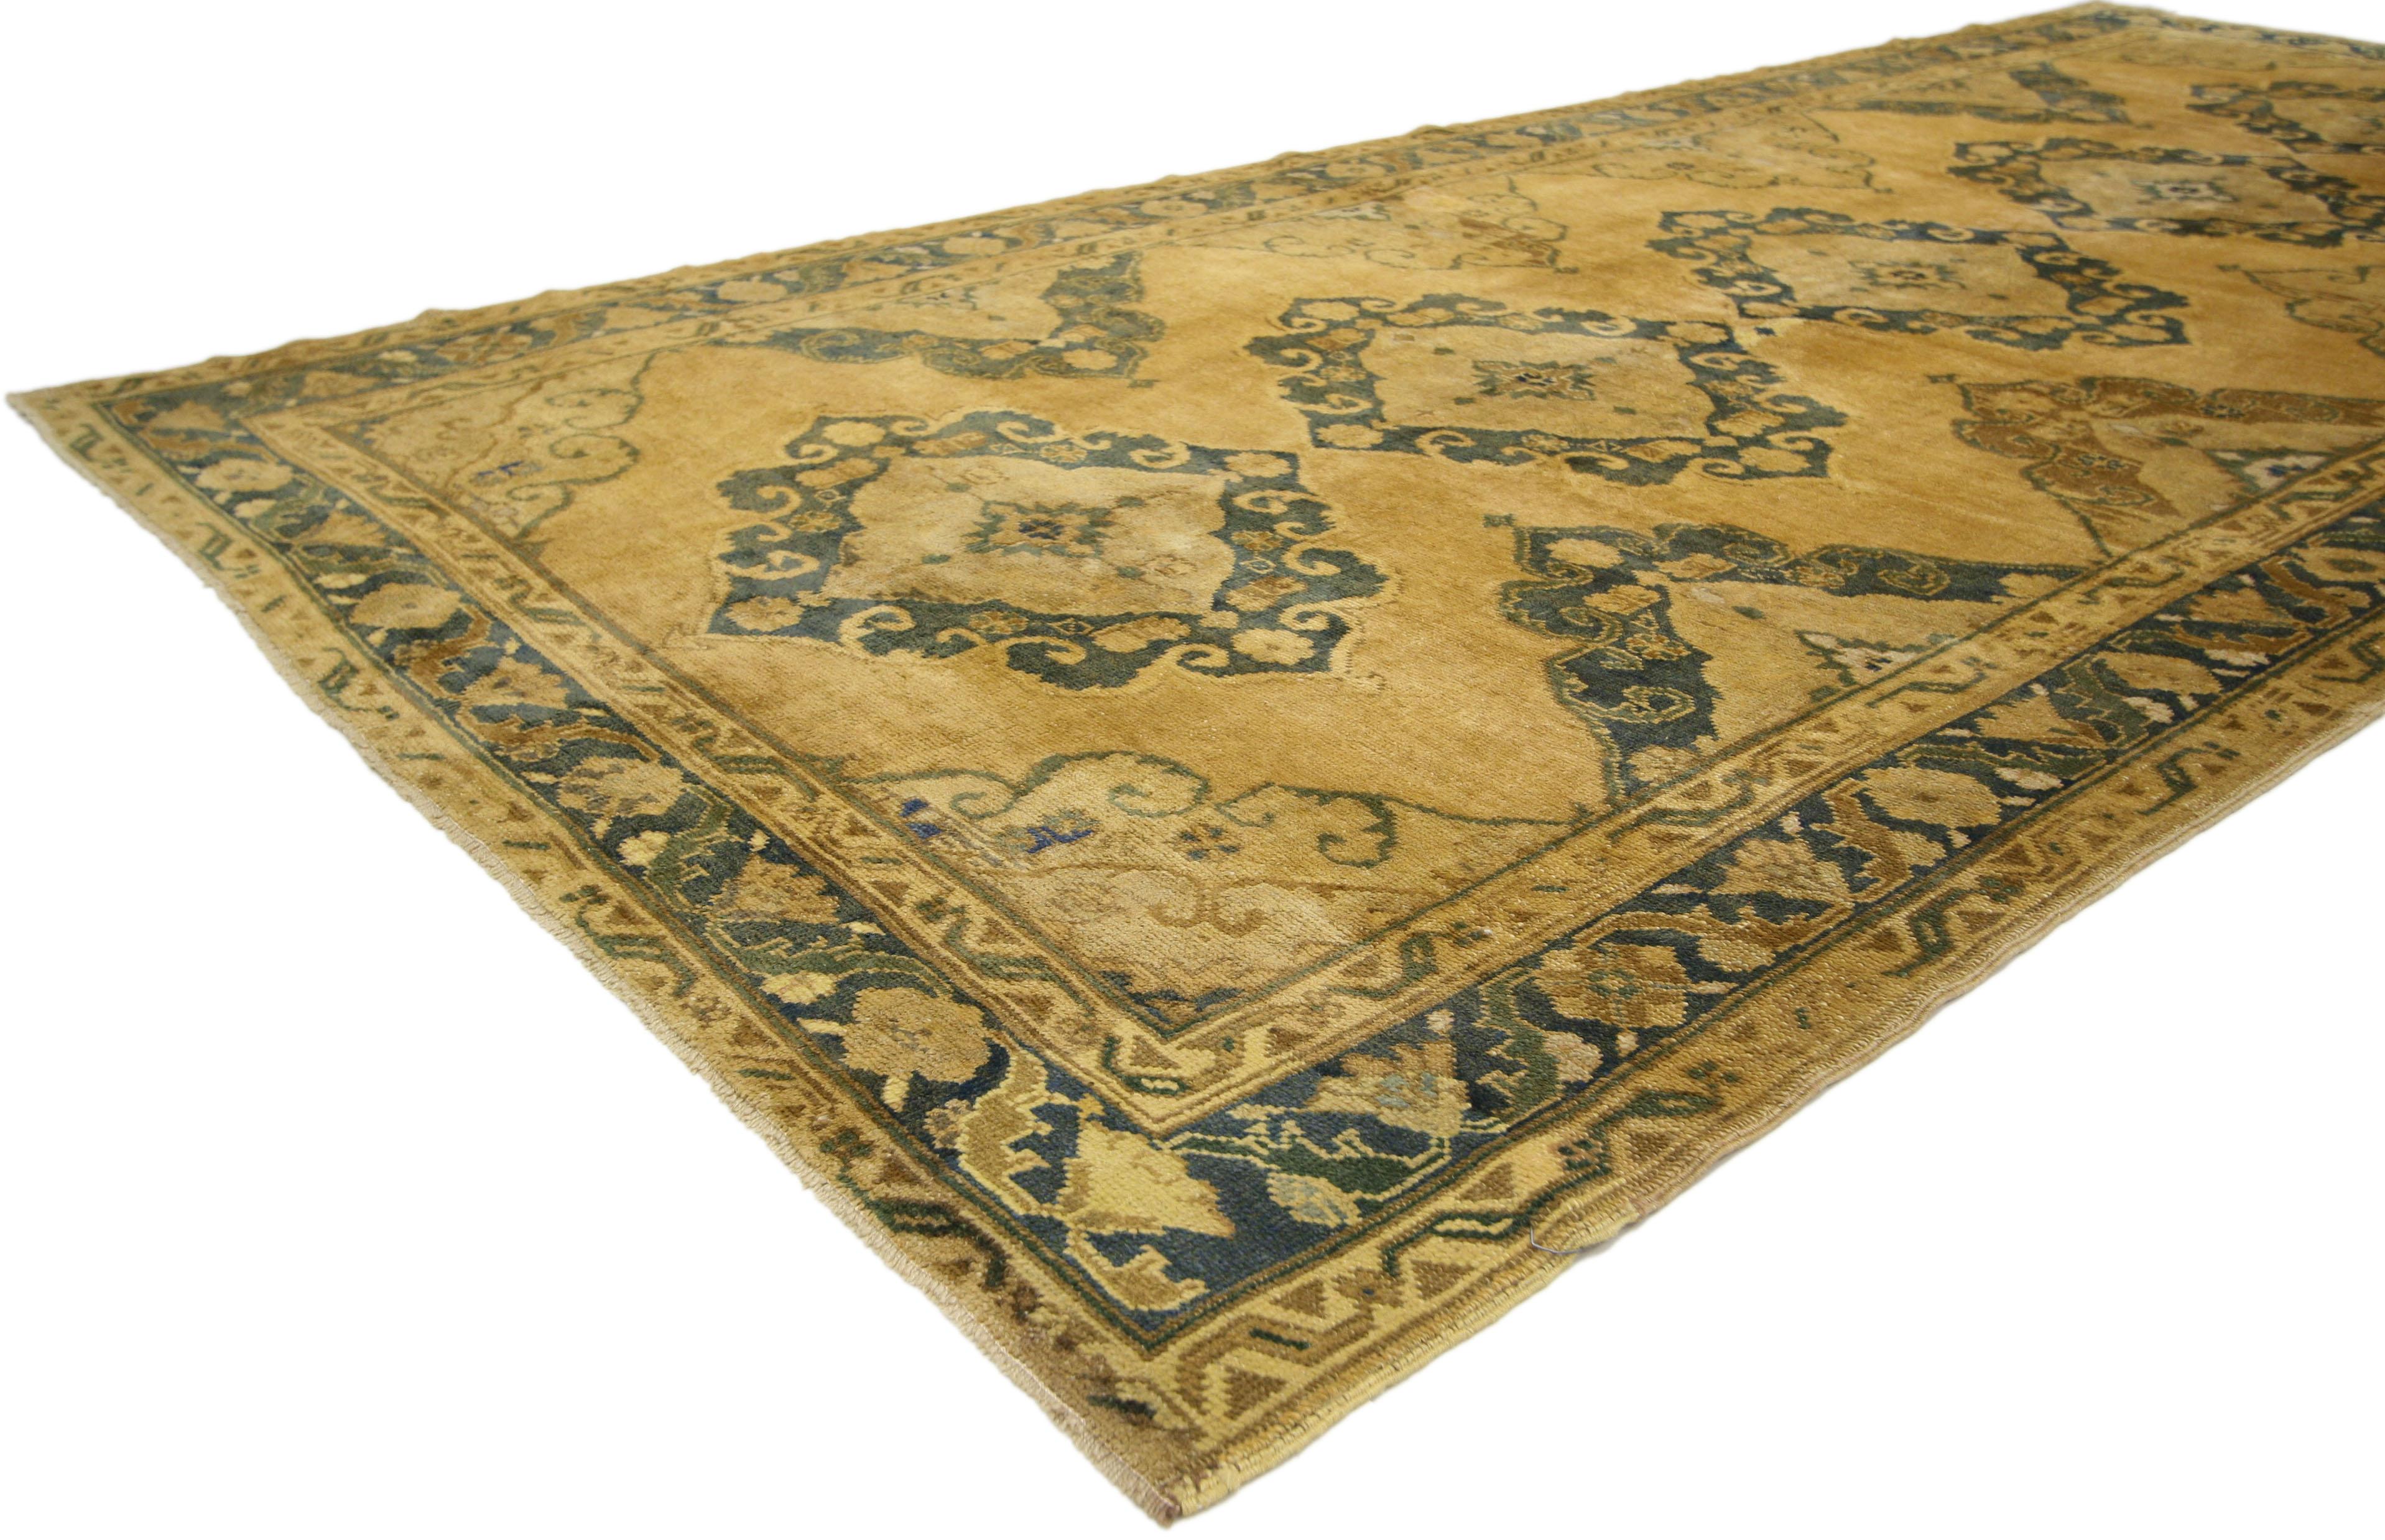 50004, vintage Turkish Oushak Gallery rug with neoclassic style, wide hallway runner. Elegant and captivating, this hand knotted wool vintage Turkish Oushak gallery rug features five Chinese Cloud collar medallions. Four half trefoil ziggurats